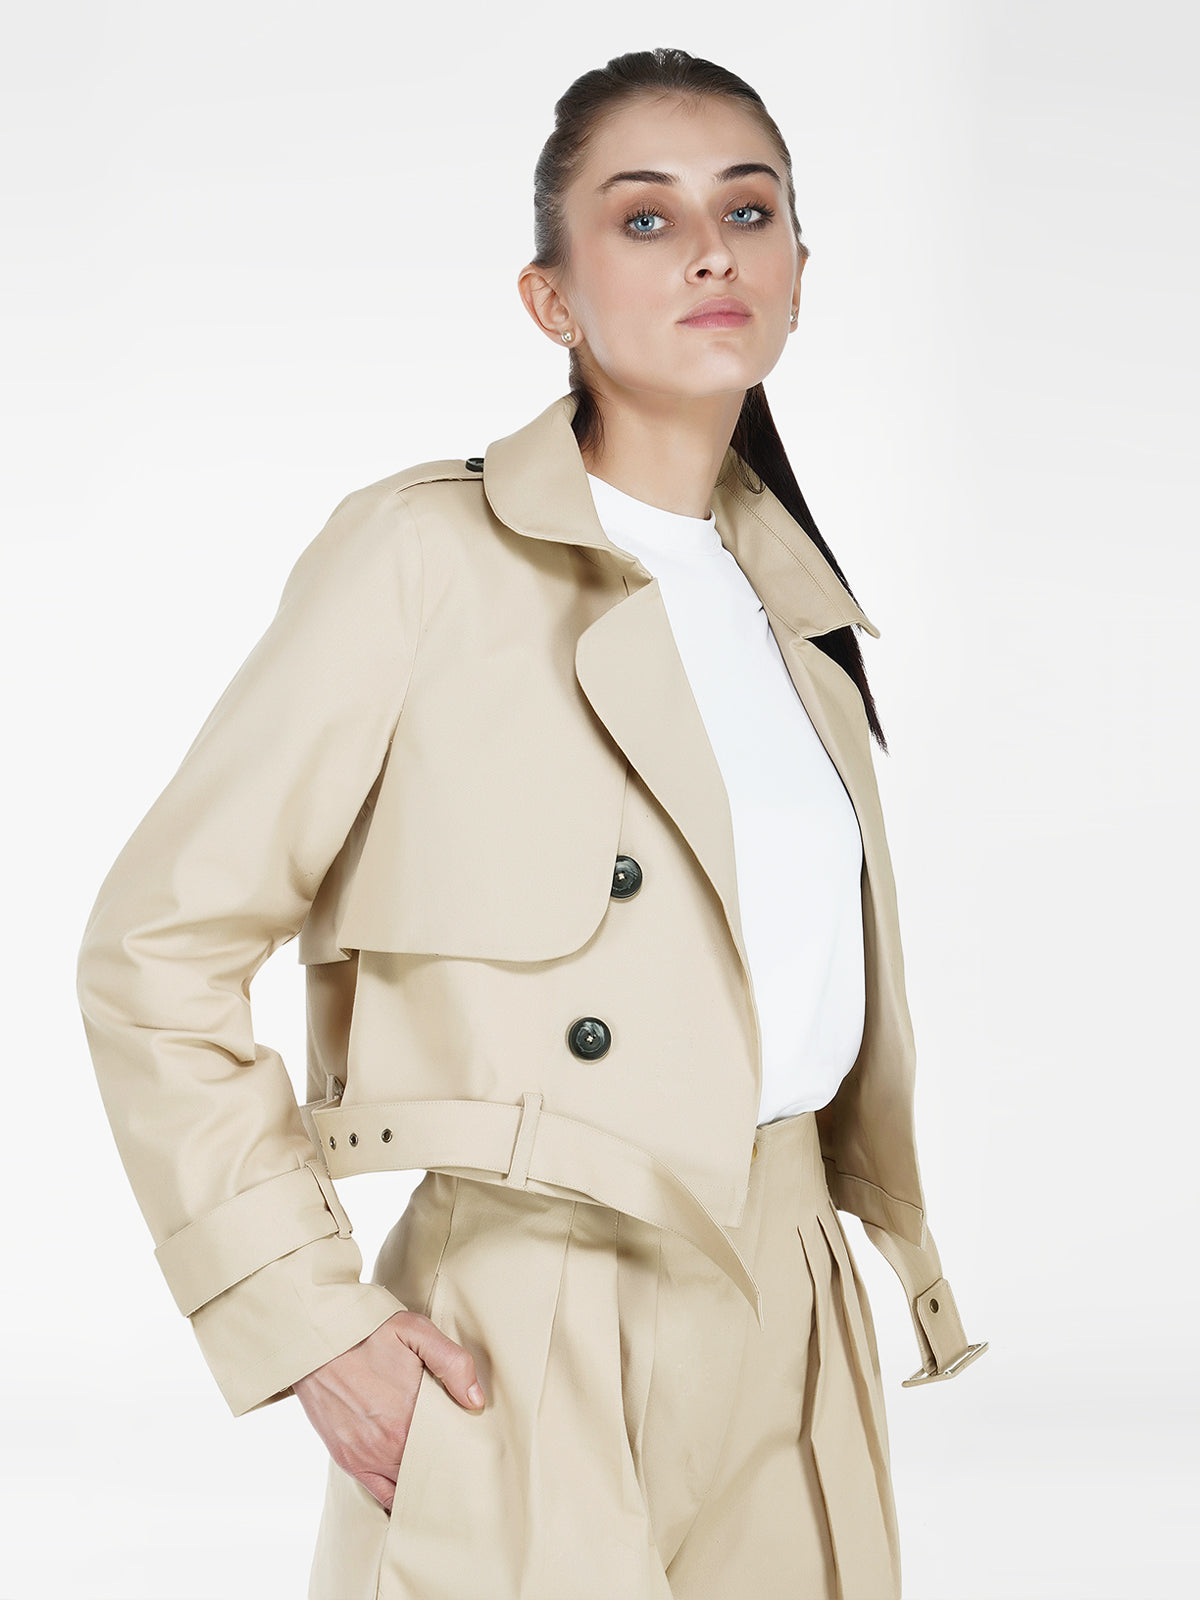 Cropped Trench Coat in Camel Color